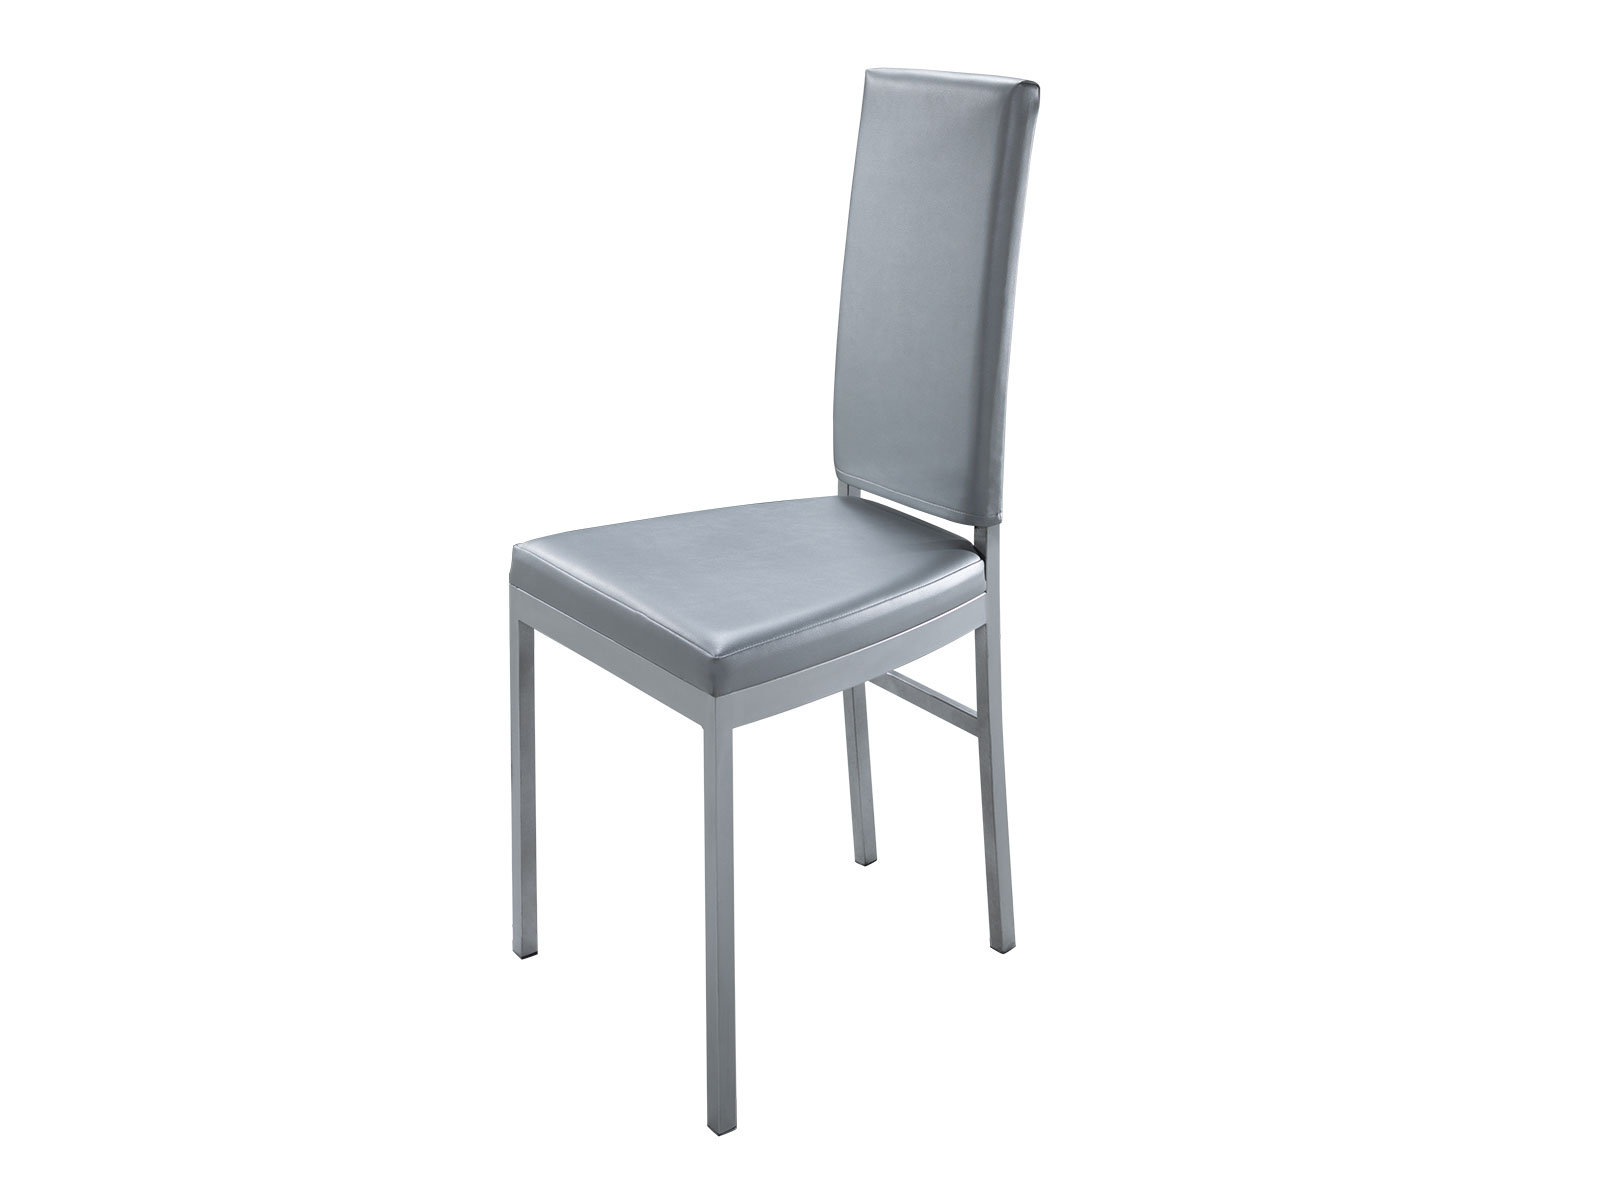 CEGS-012 High Back Dining Chair -- Trade Show Rental